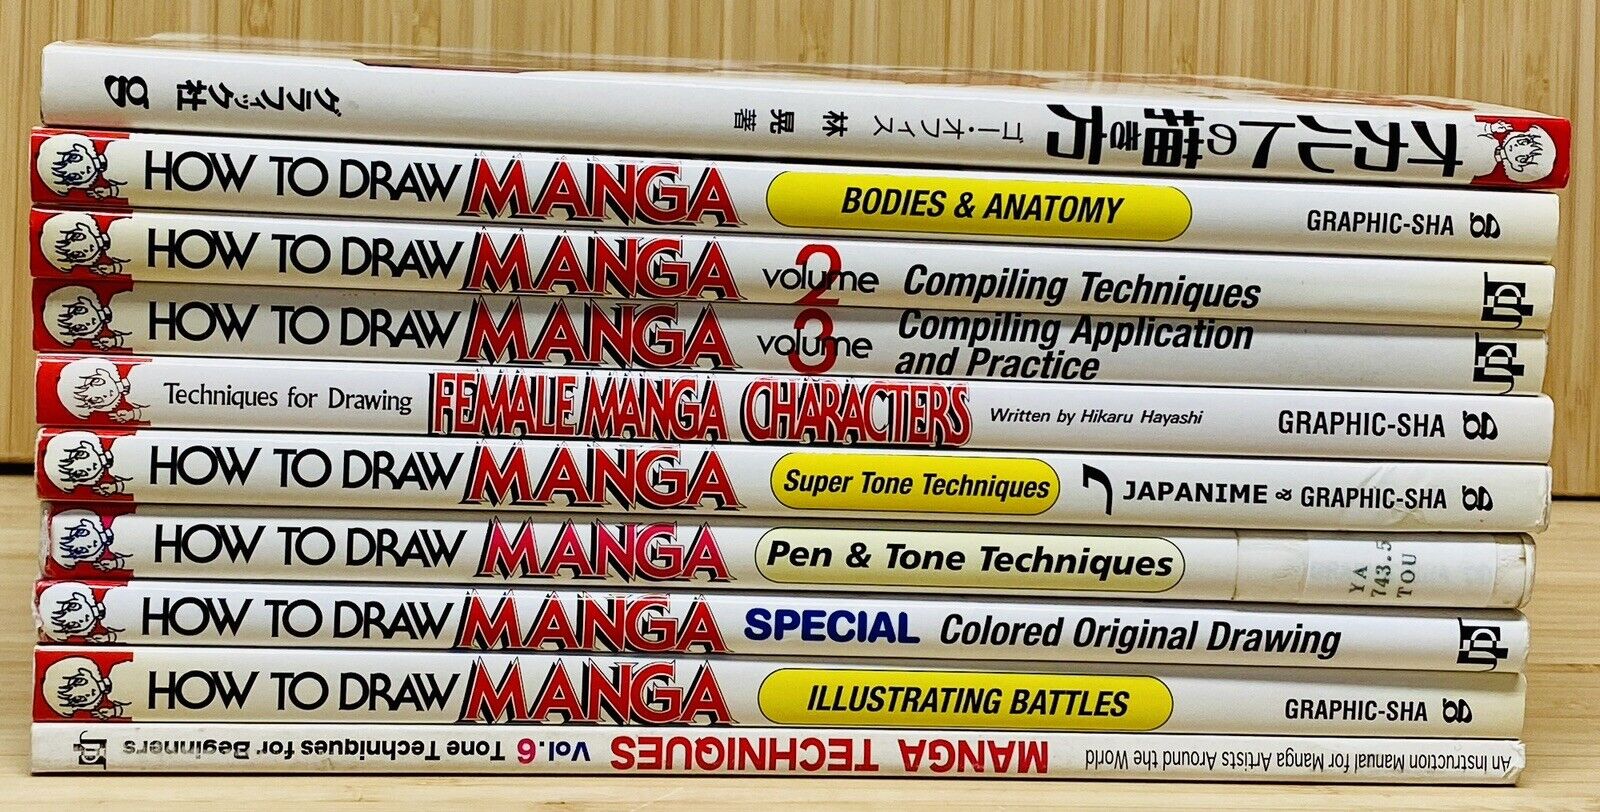 Lot of 10 HOW TO DRAW MANGA  / Techniques Books Various authors Drawing Art